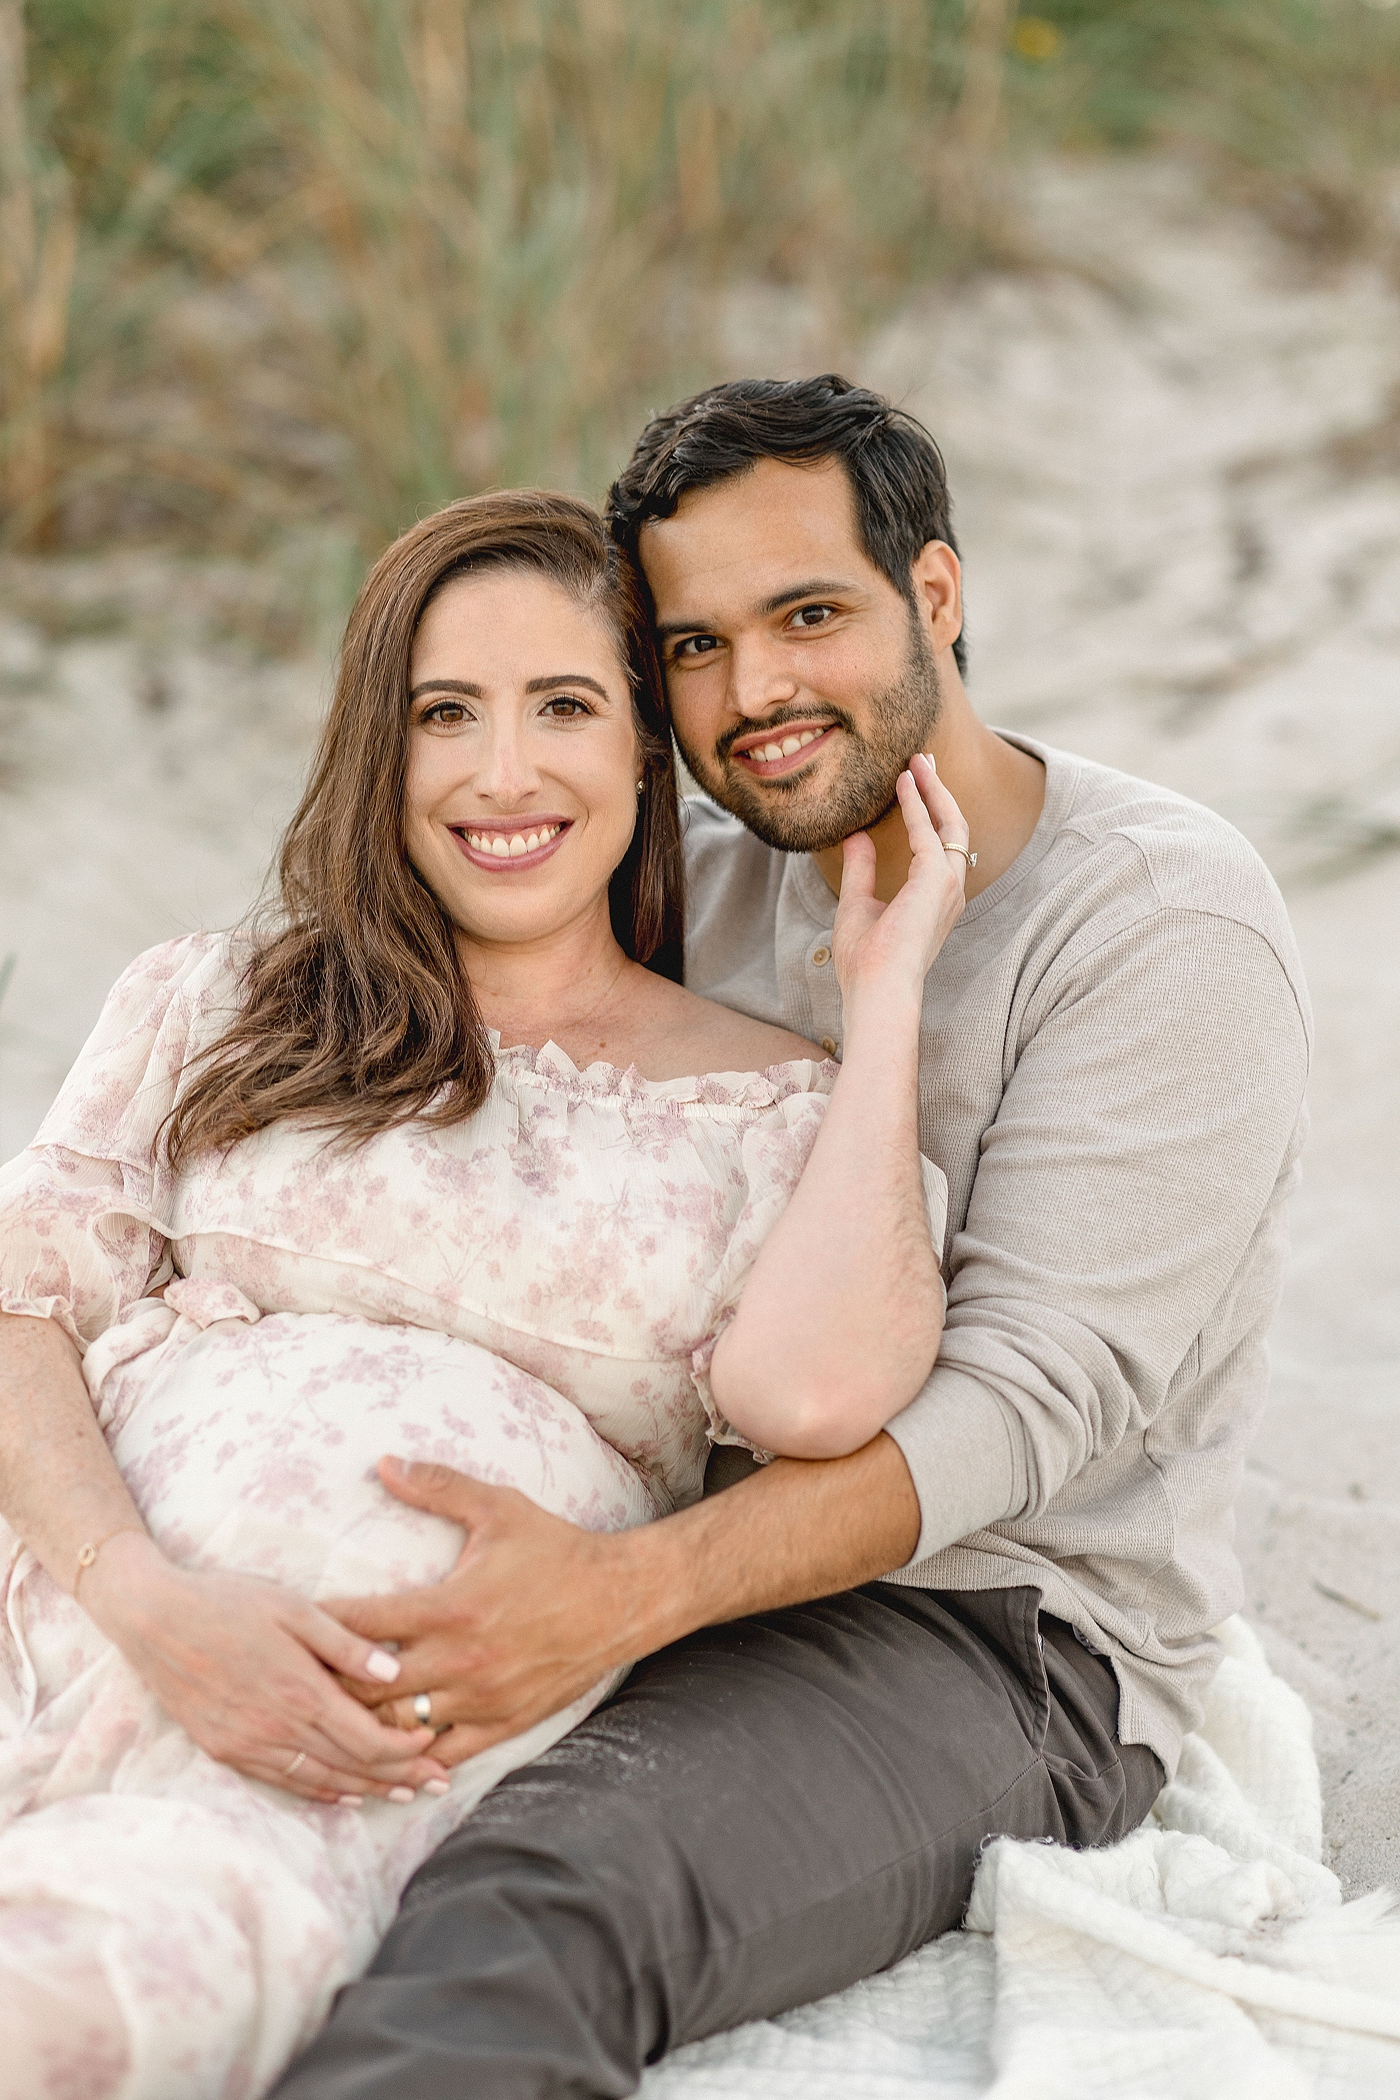 Mom and Dad snuggle while on the beach during their Maternity photos at El Farito Beach Miami FL. Photo by Ivanna Vidal Photography.